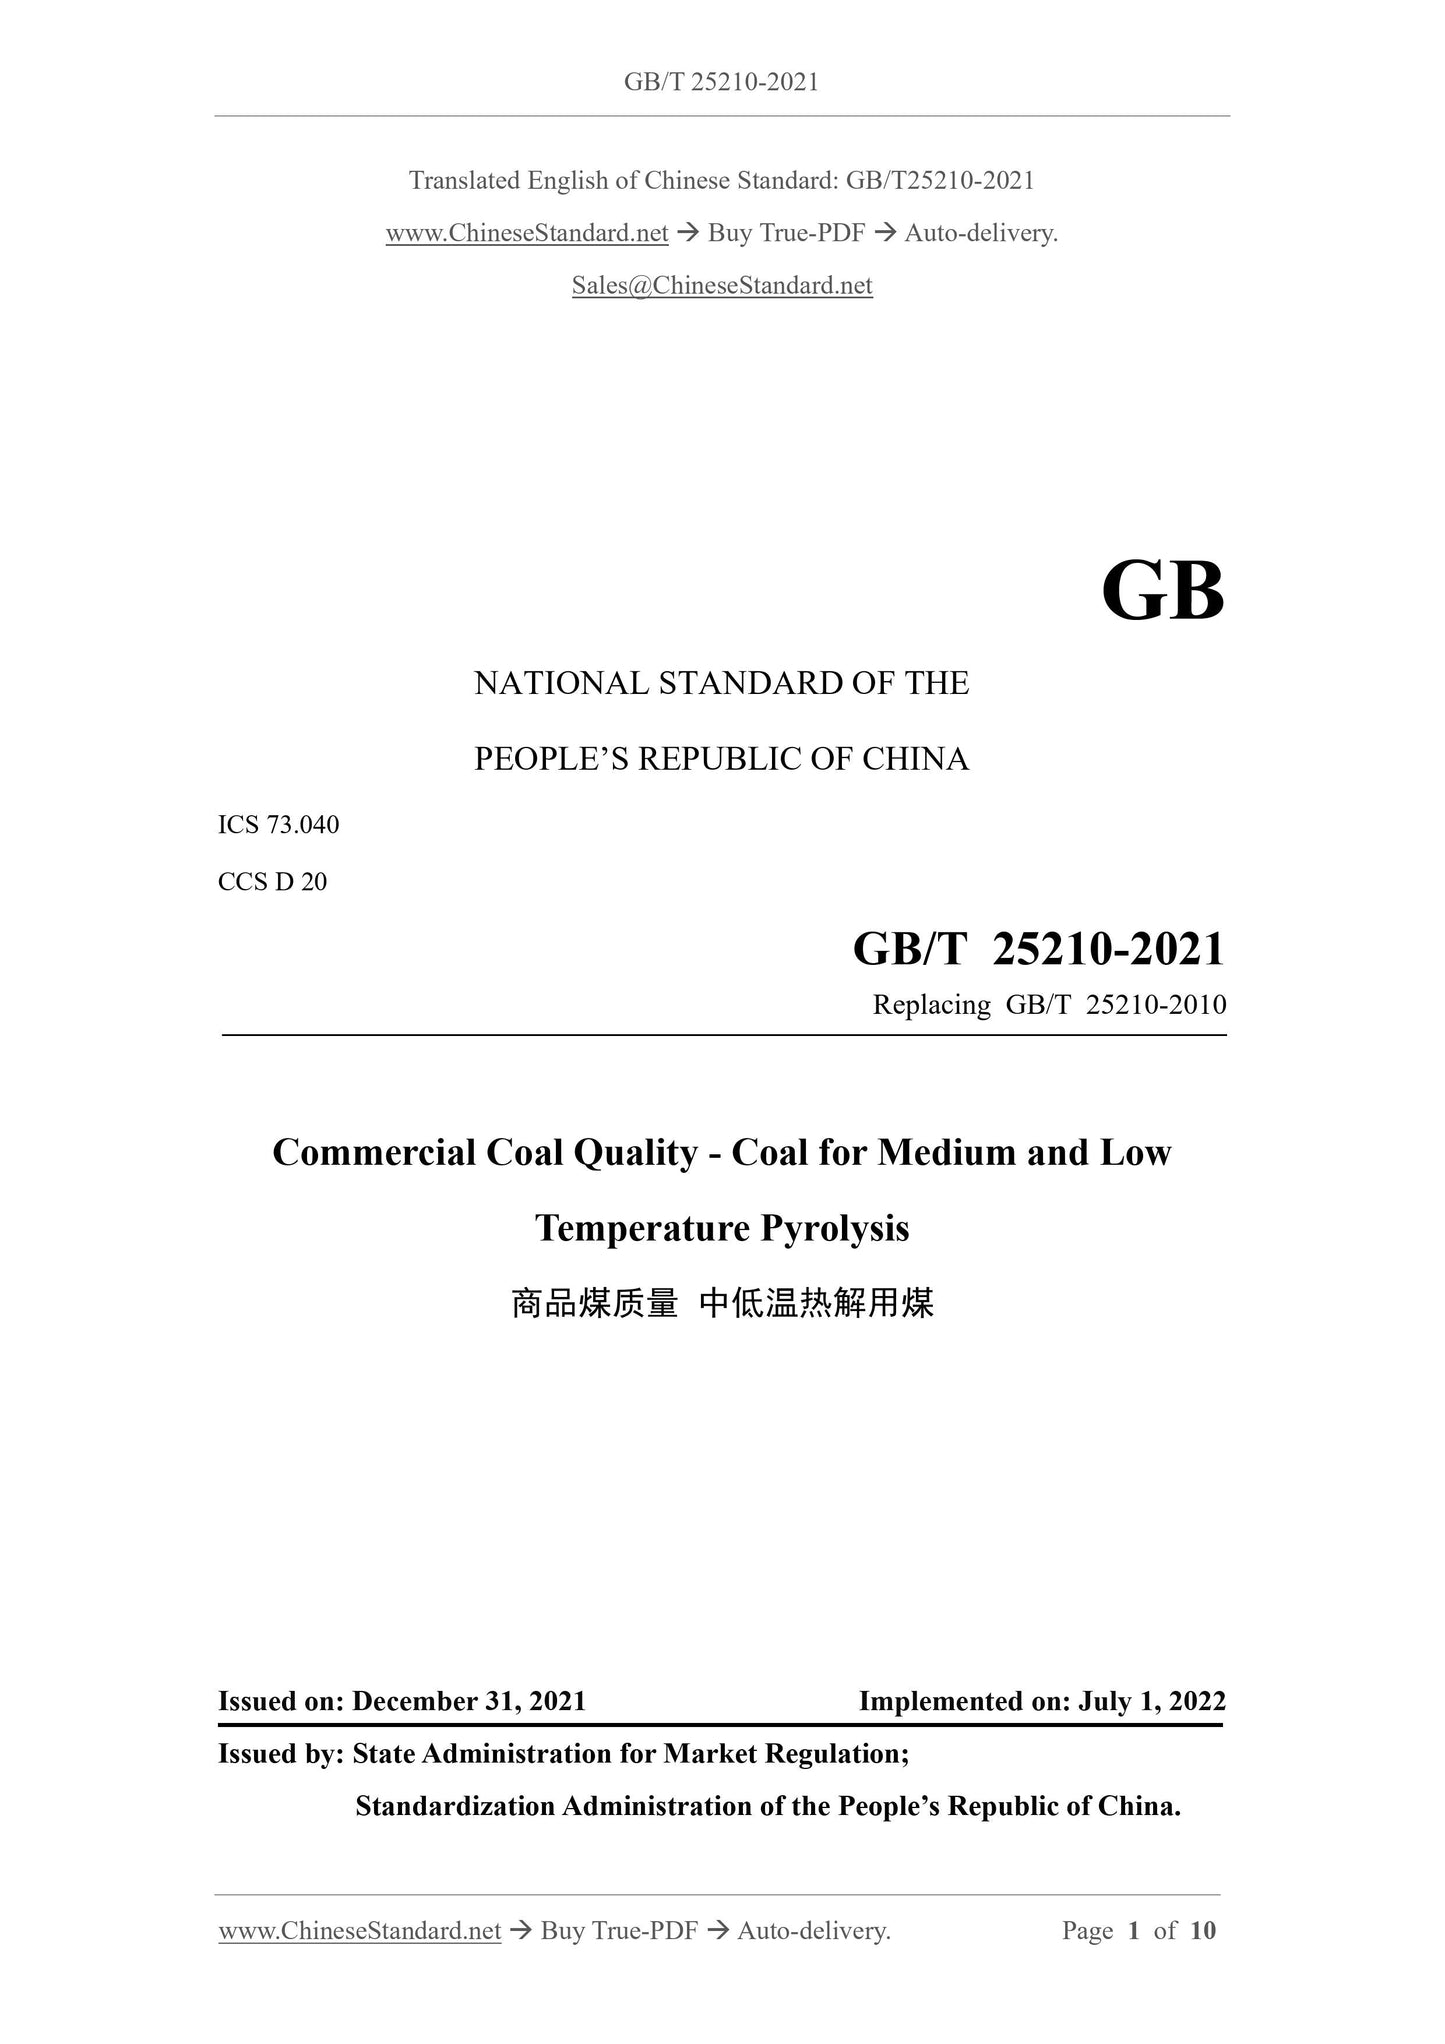 GB/T 25210-2021 Page 1